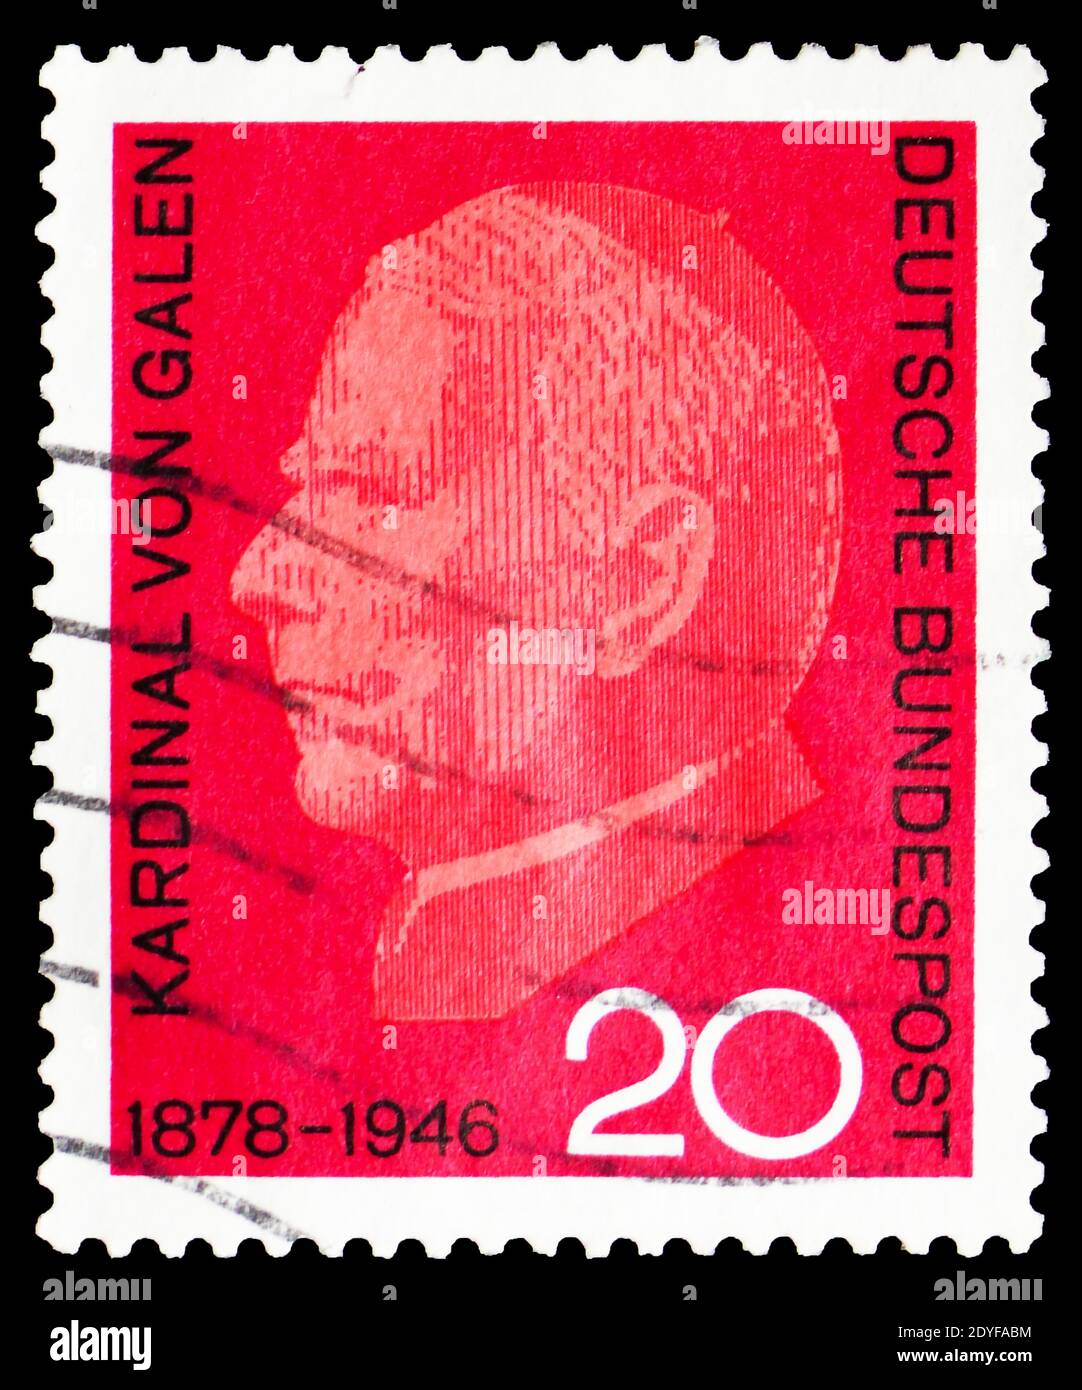 MOSCOW, RUSSIA - FEBRUARY 22, 2019: A stamp printed in Germany, Federal Republic shows Graf Clemens August von Galen, 20th Death Anniversary of Cardin Stock Photo